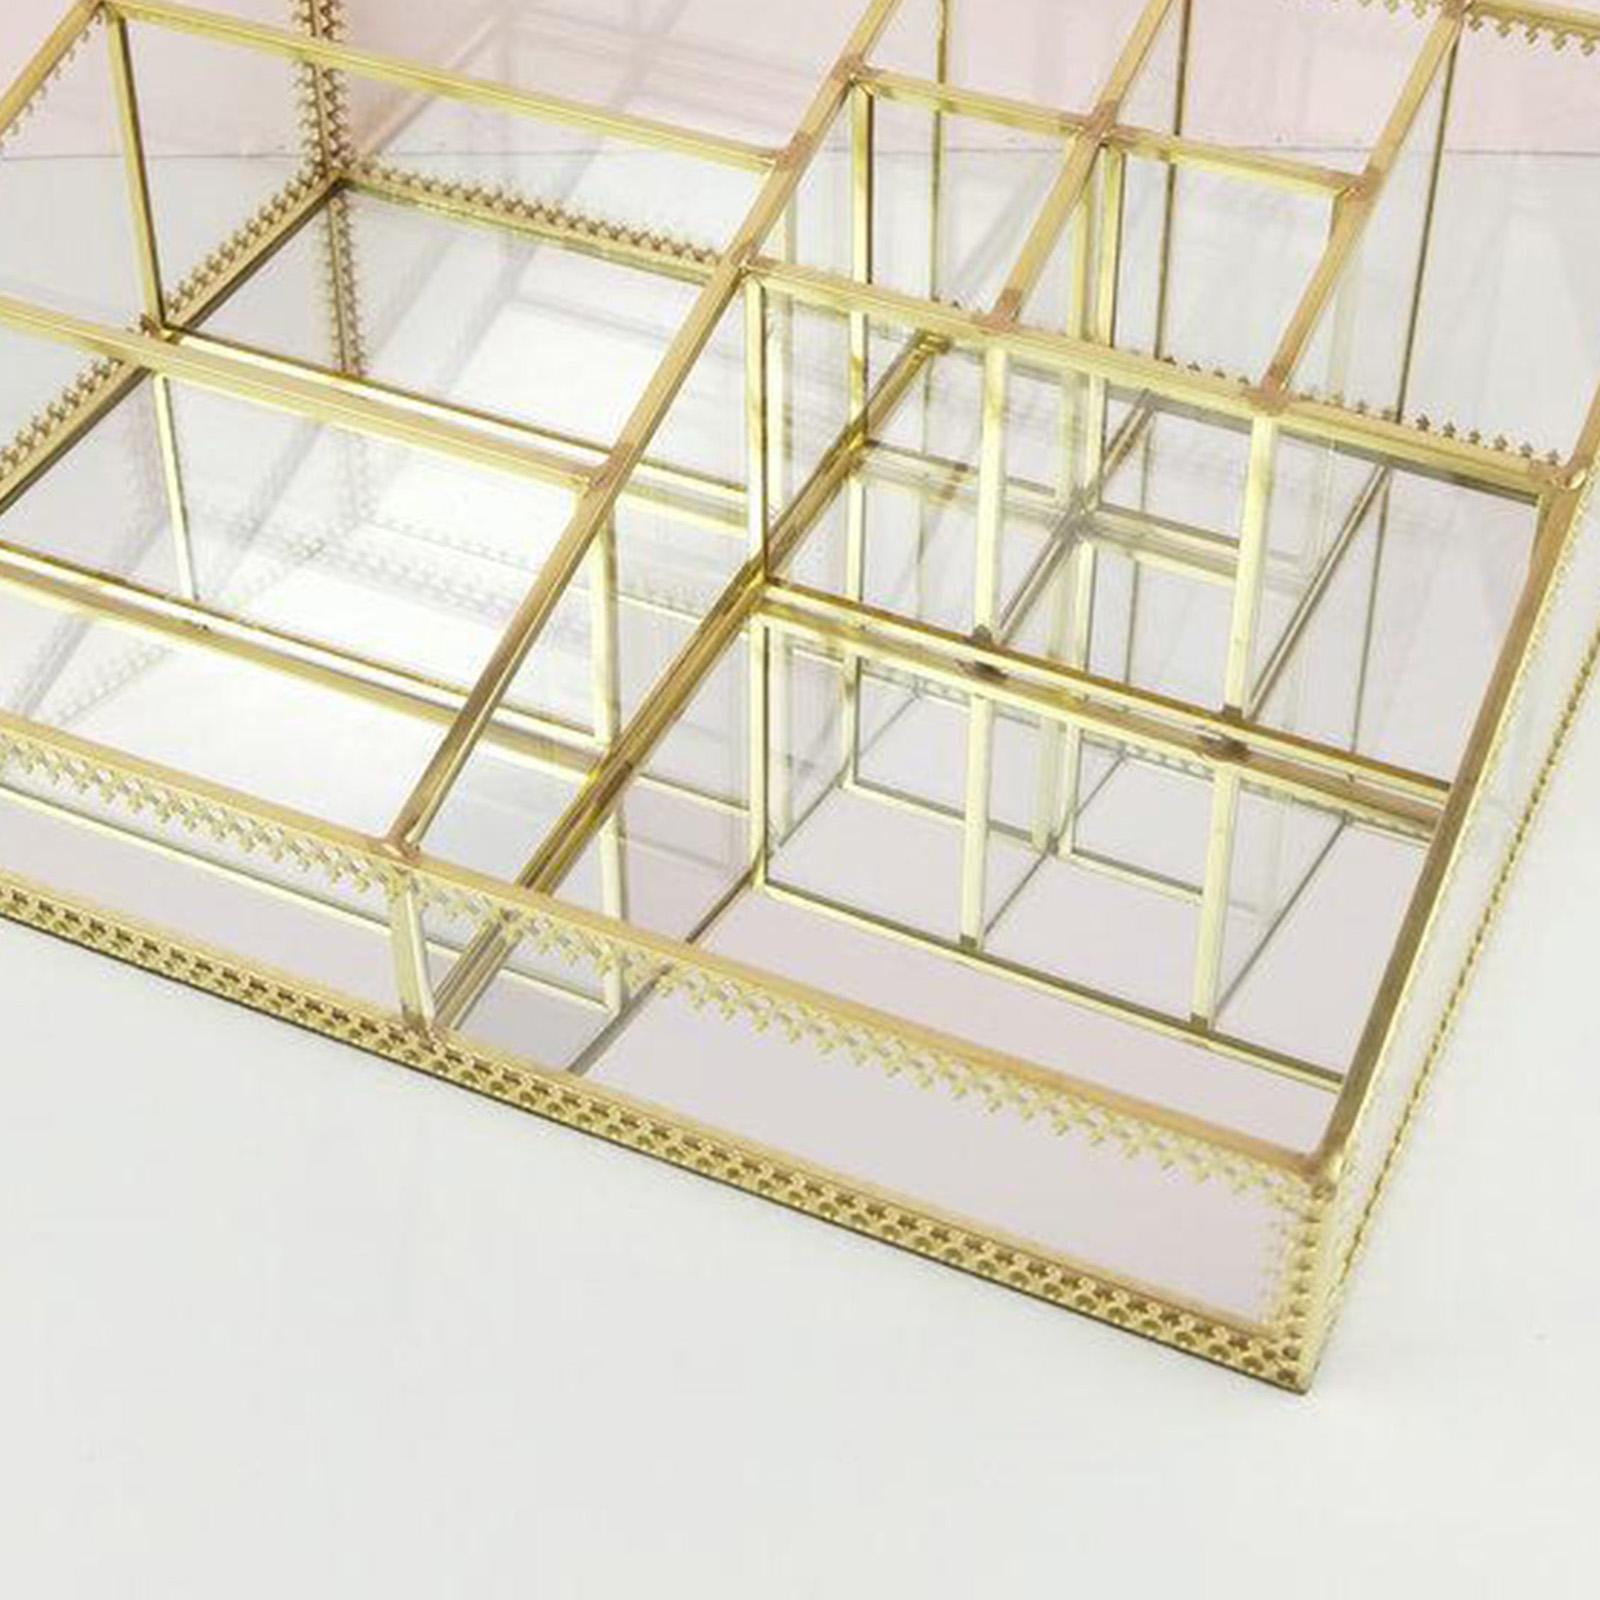 Luxury Glass Box Clear Glass Gold Tone Metal Jewelry Storage Case Cosmetic Makeup Lipstick Holder Organizer, 9 Compartments